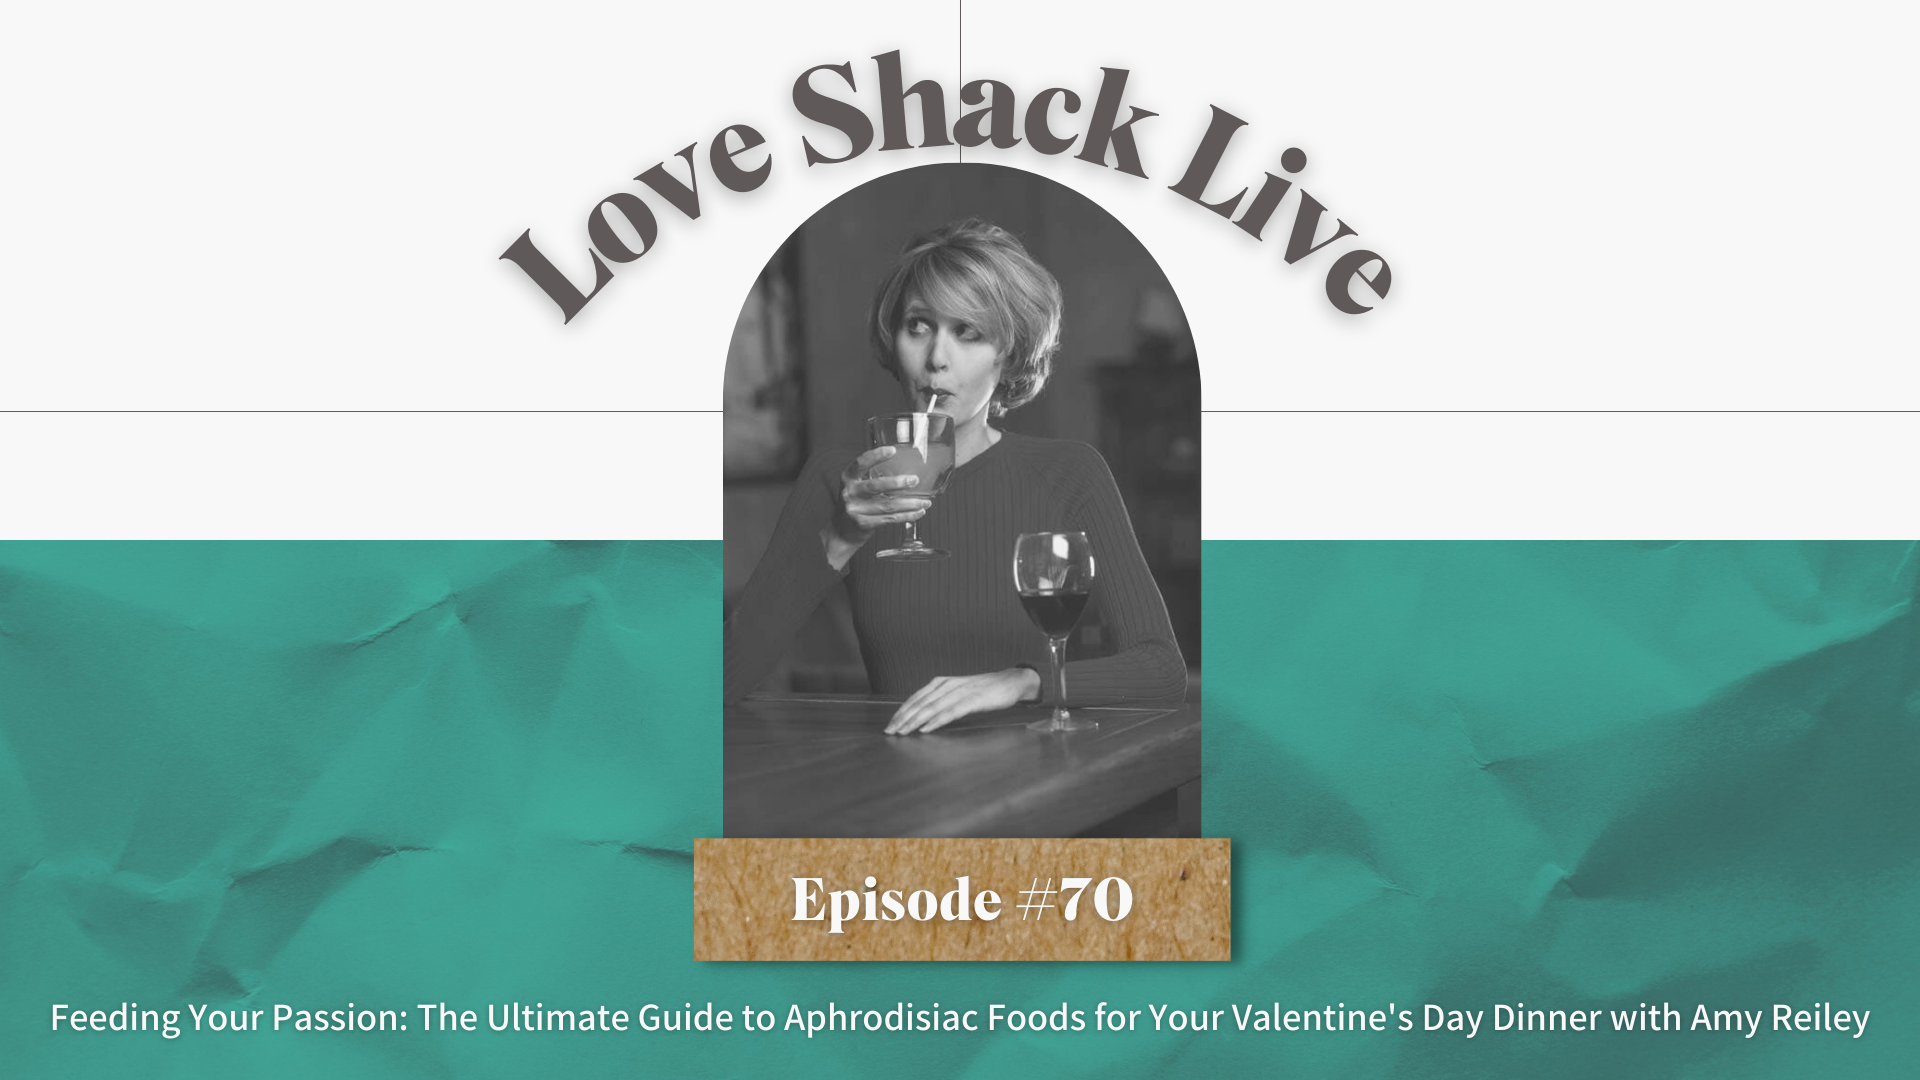 Feeding Your Passion: The Ultimate Guide to Aphrodisiac Foods for Your Valentine's Day Dinner